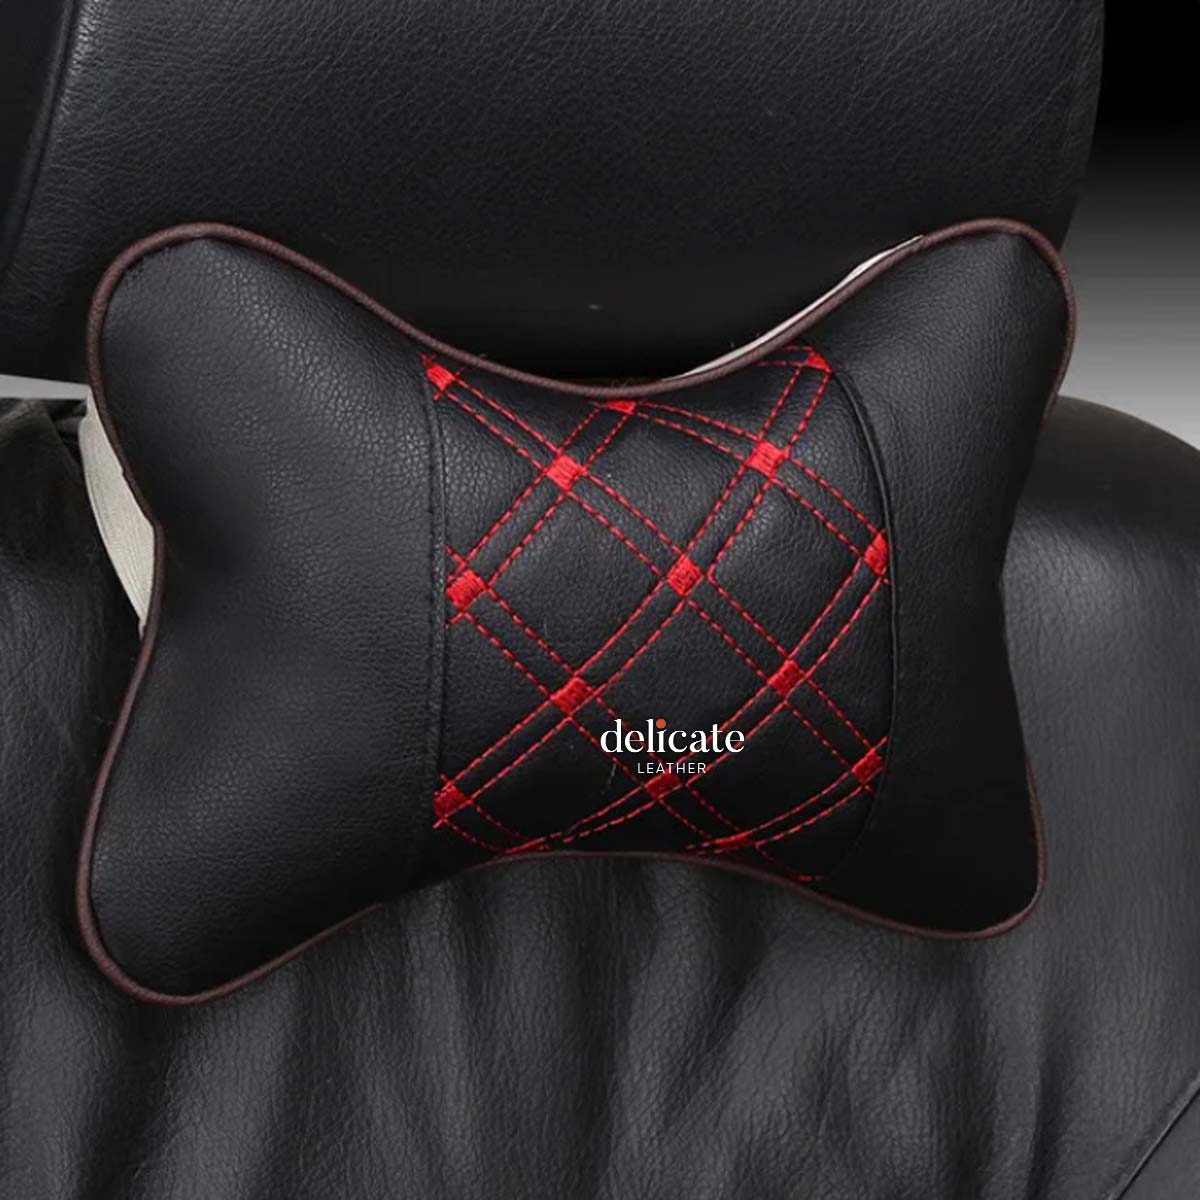 New Car Neck Pillow with Diamond Embossed Design for Universal Auto Safety and Comfort.